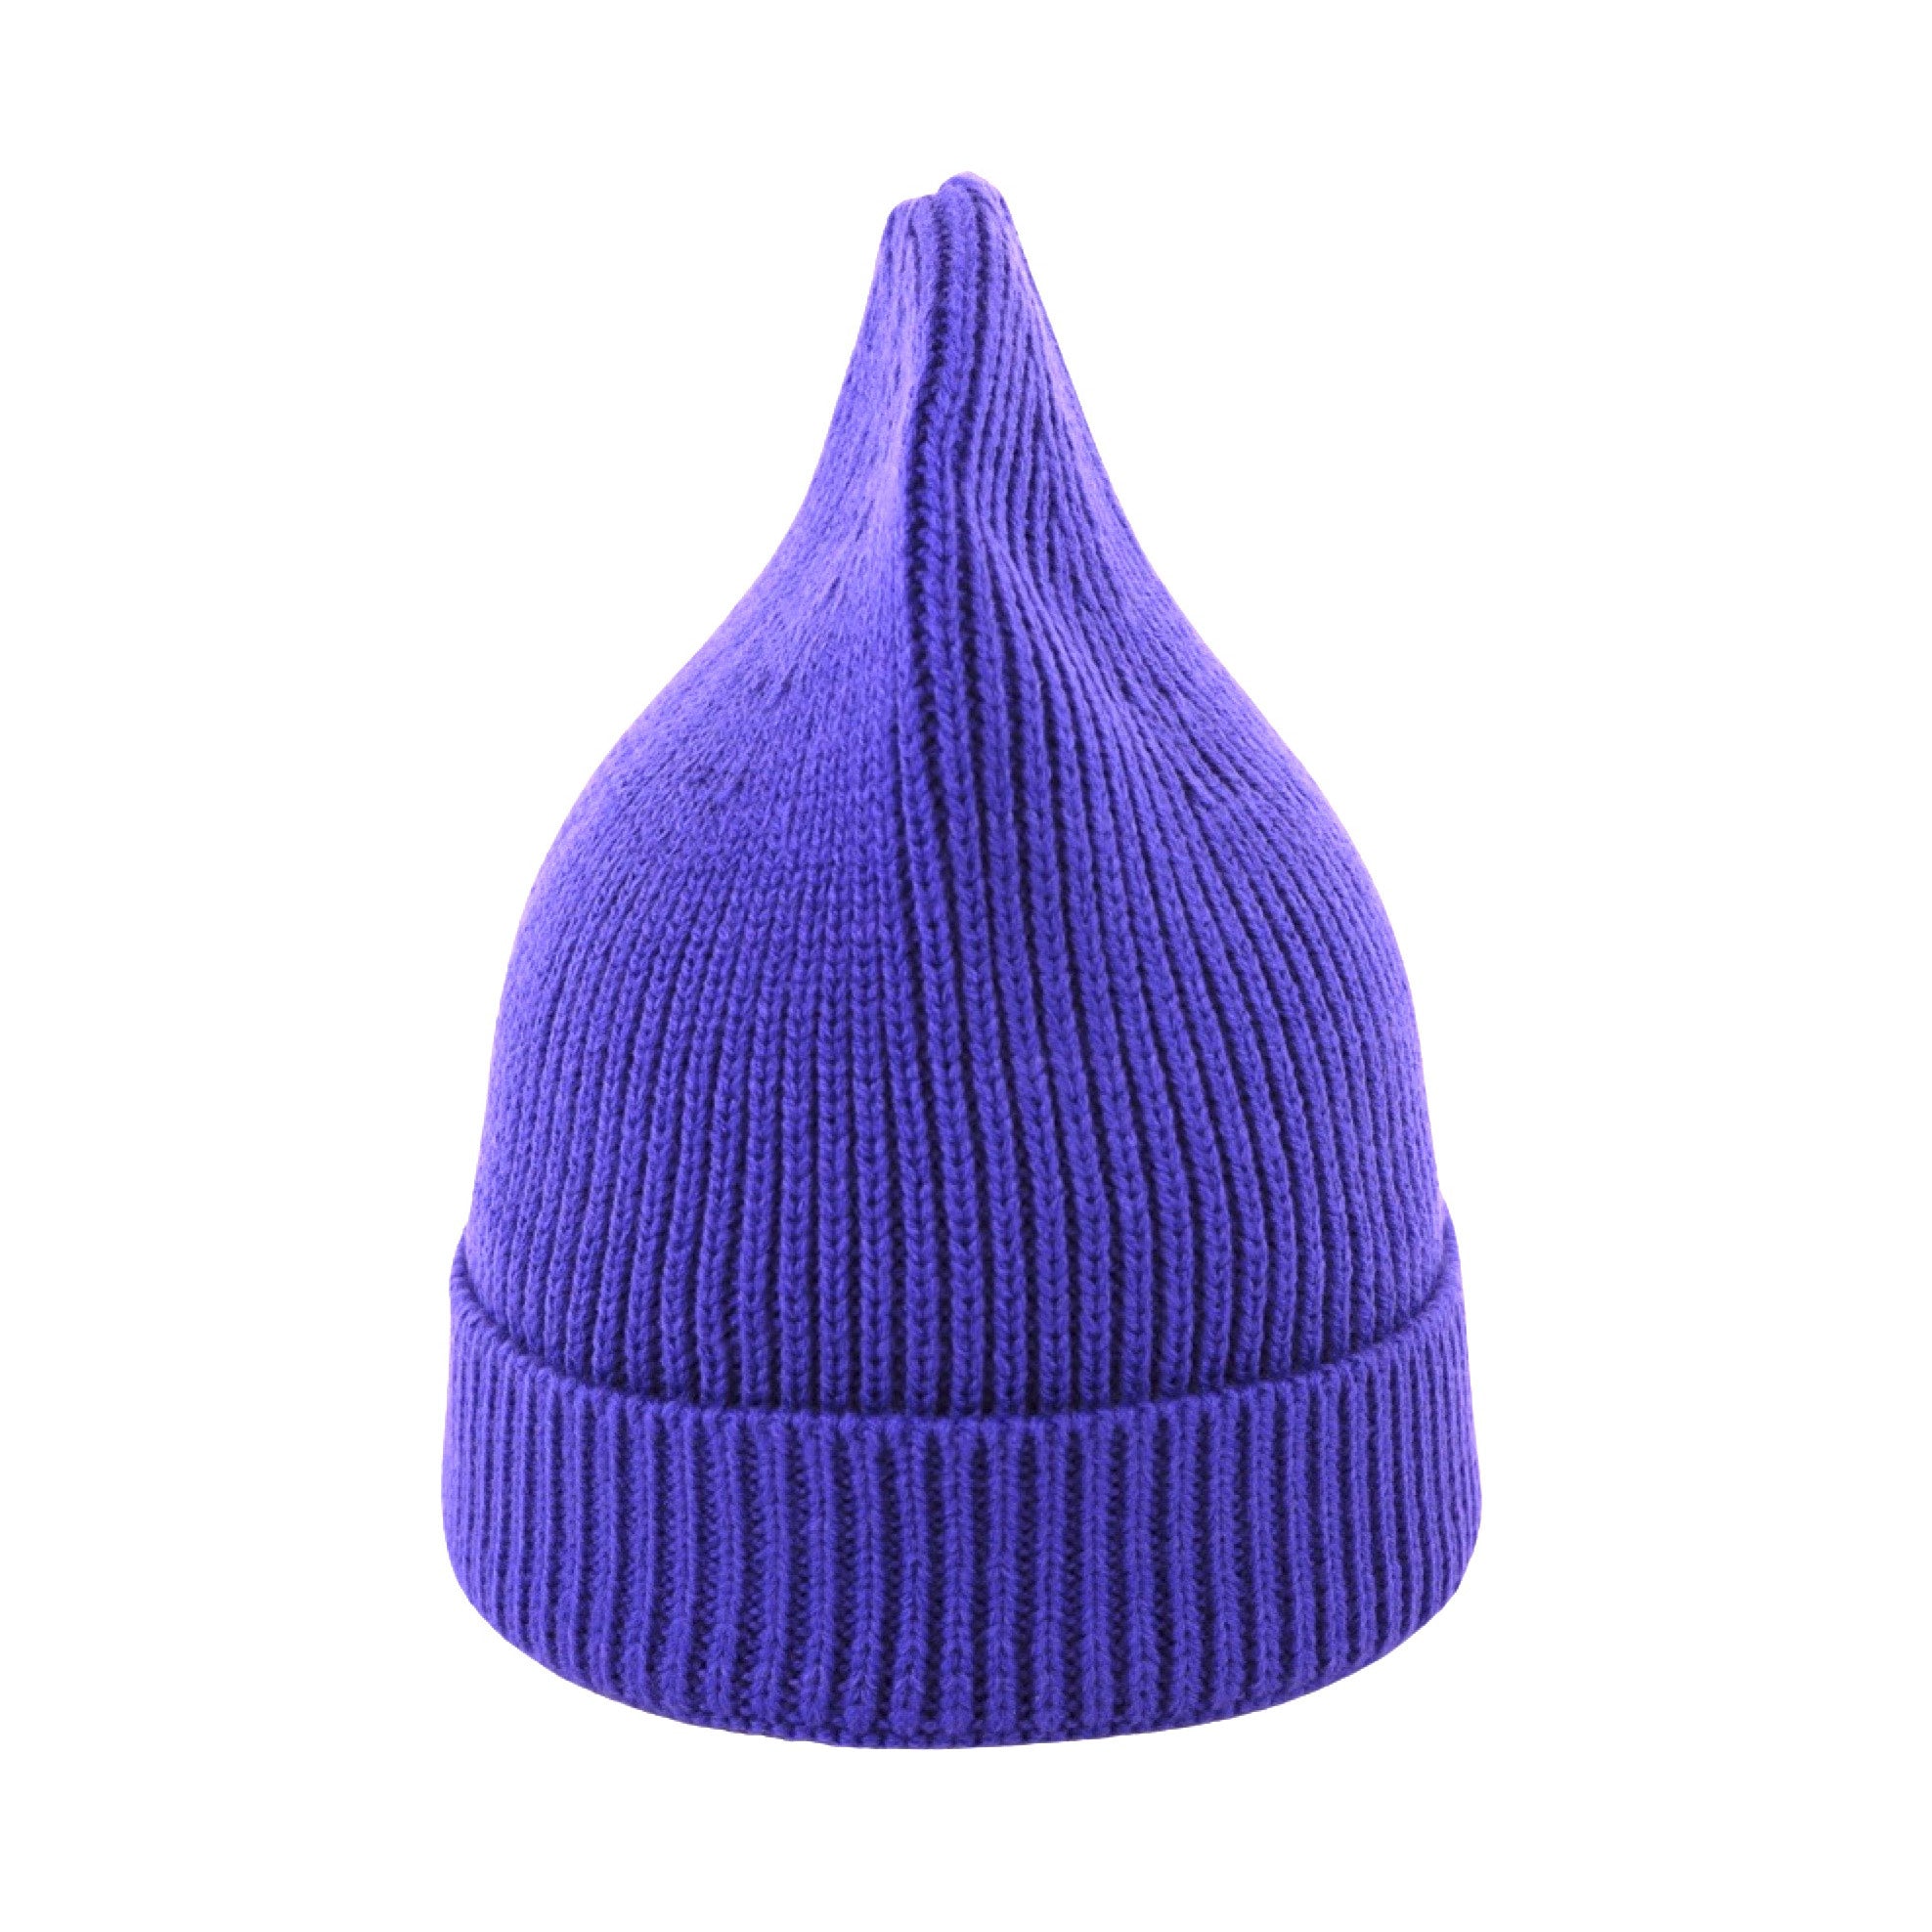 COLR by uLace Beanie - Bright Purple